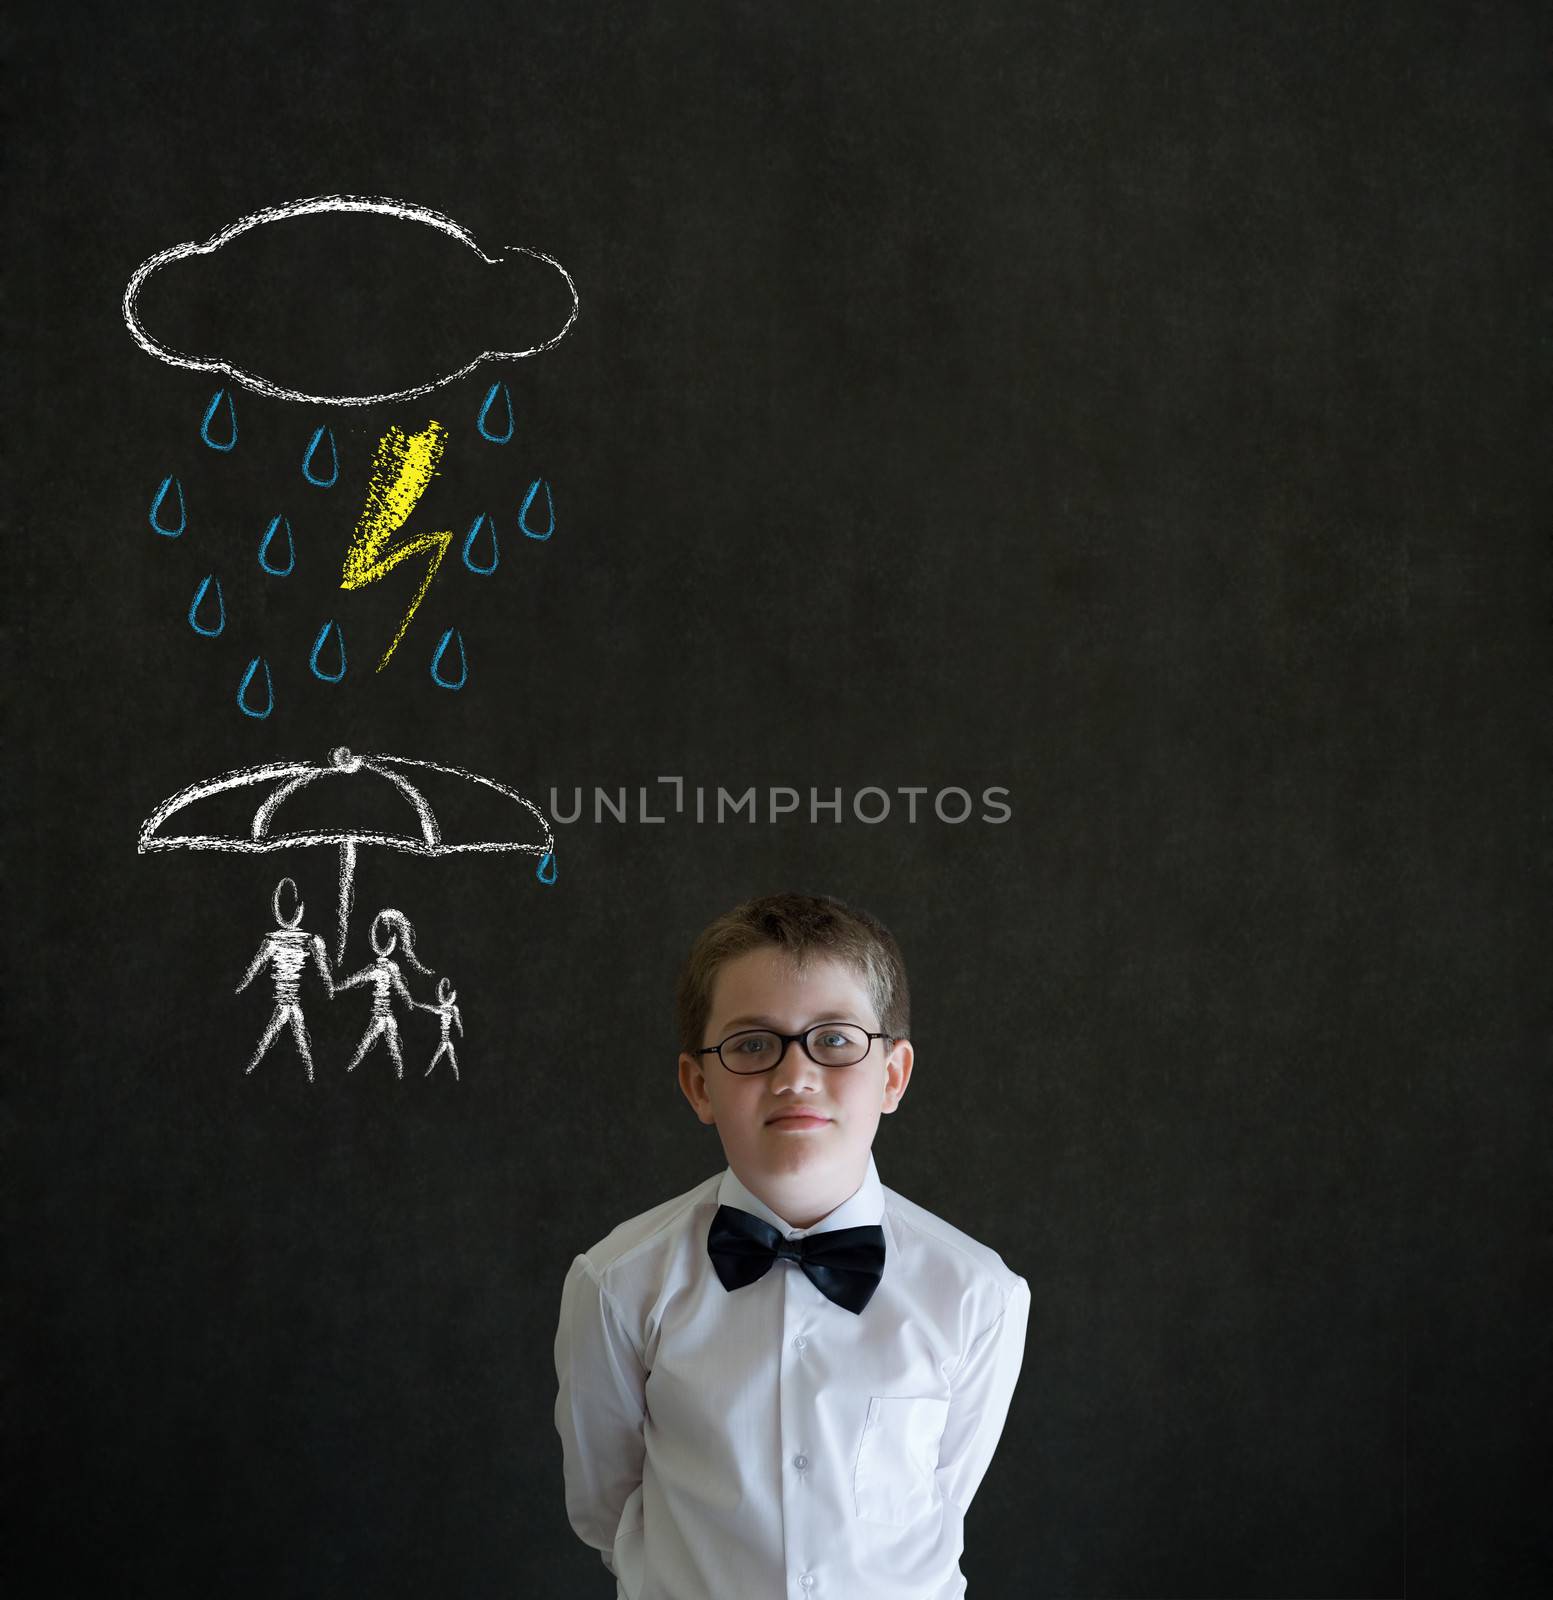 Thinking boy dressed up as business man thinking about protecting family from natural disaster on blackboard background